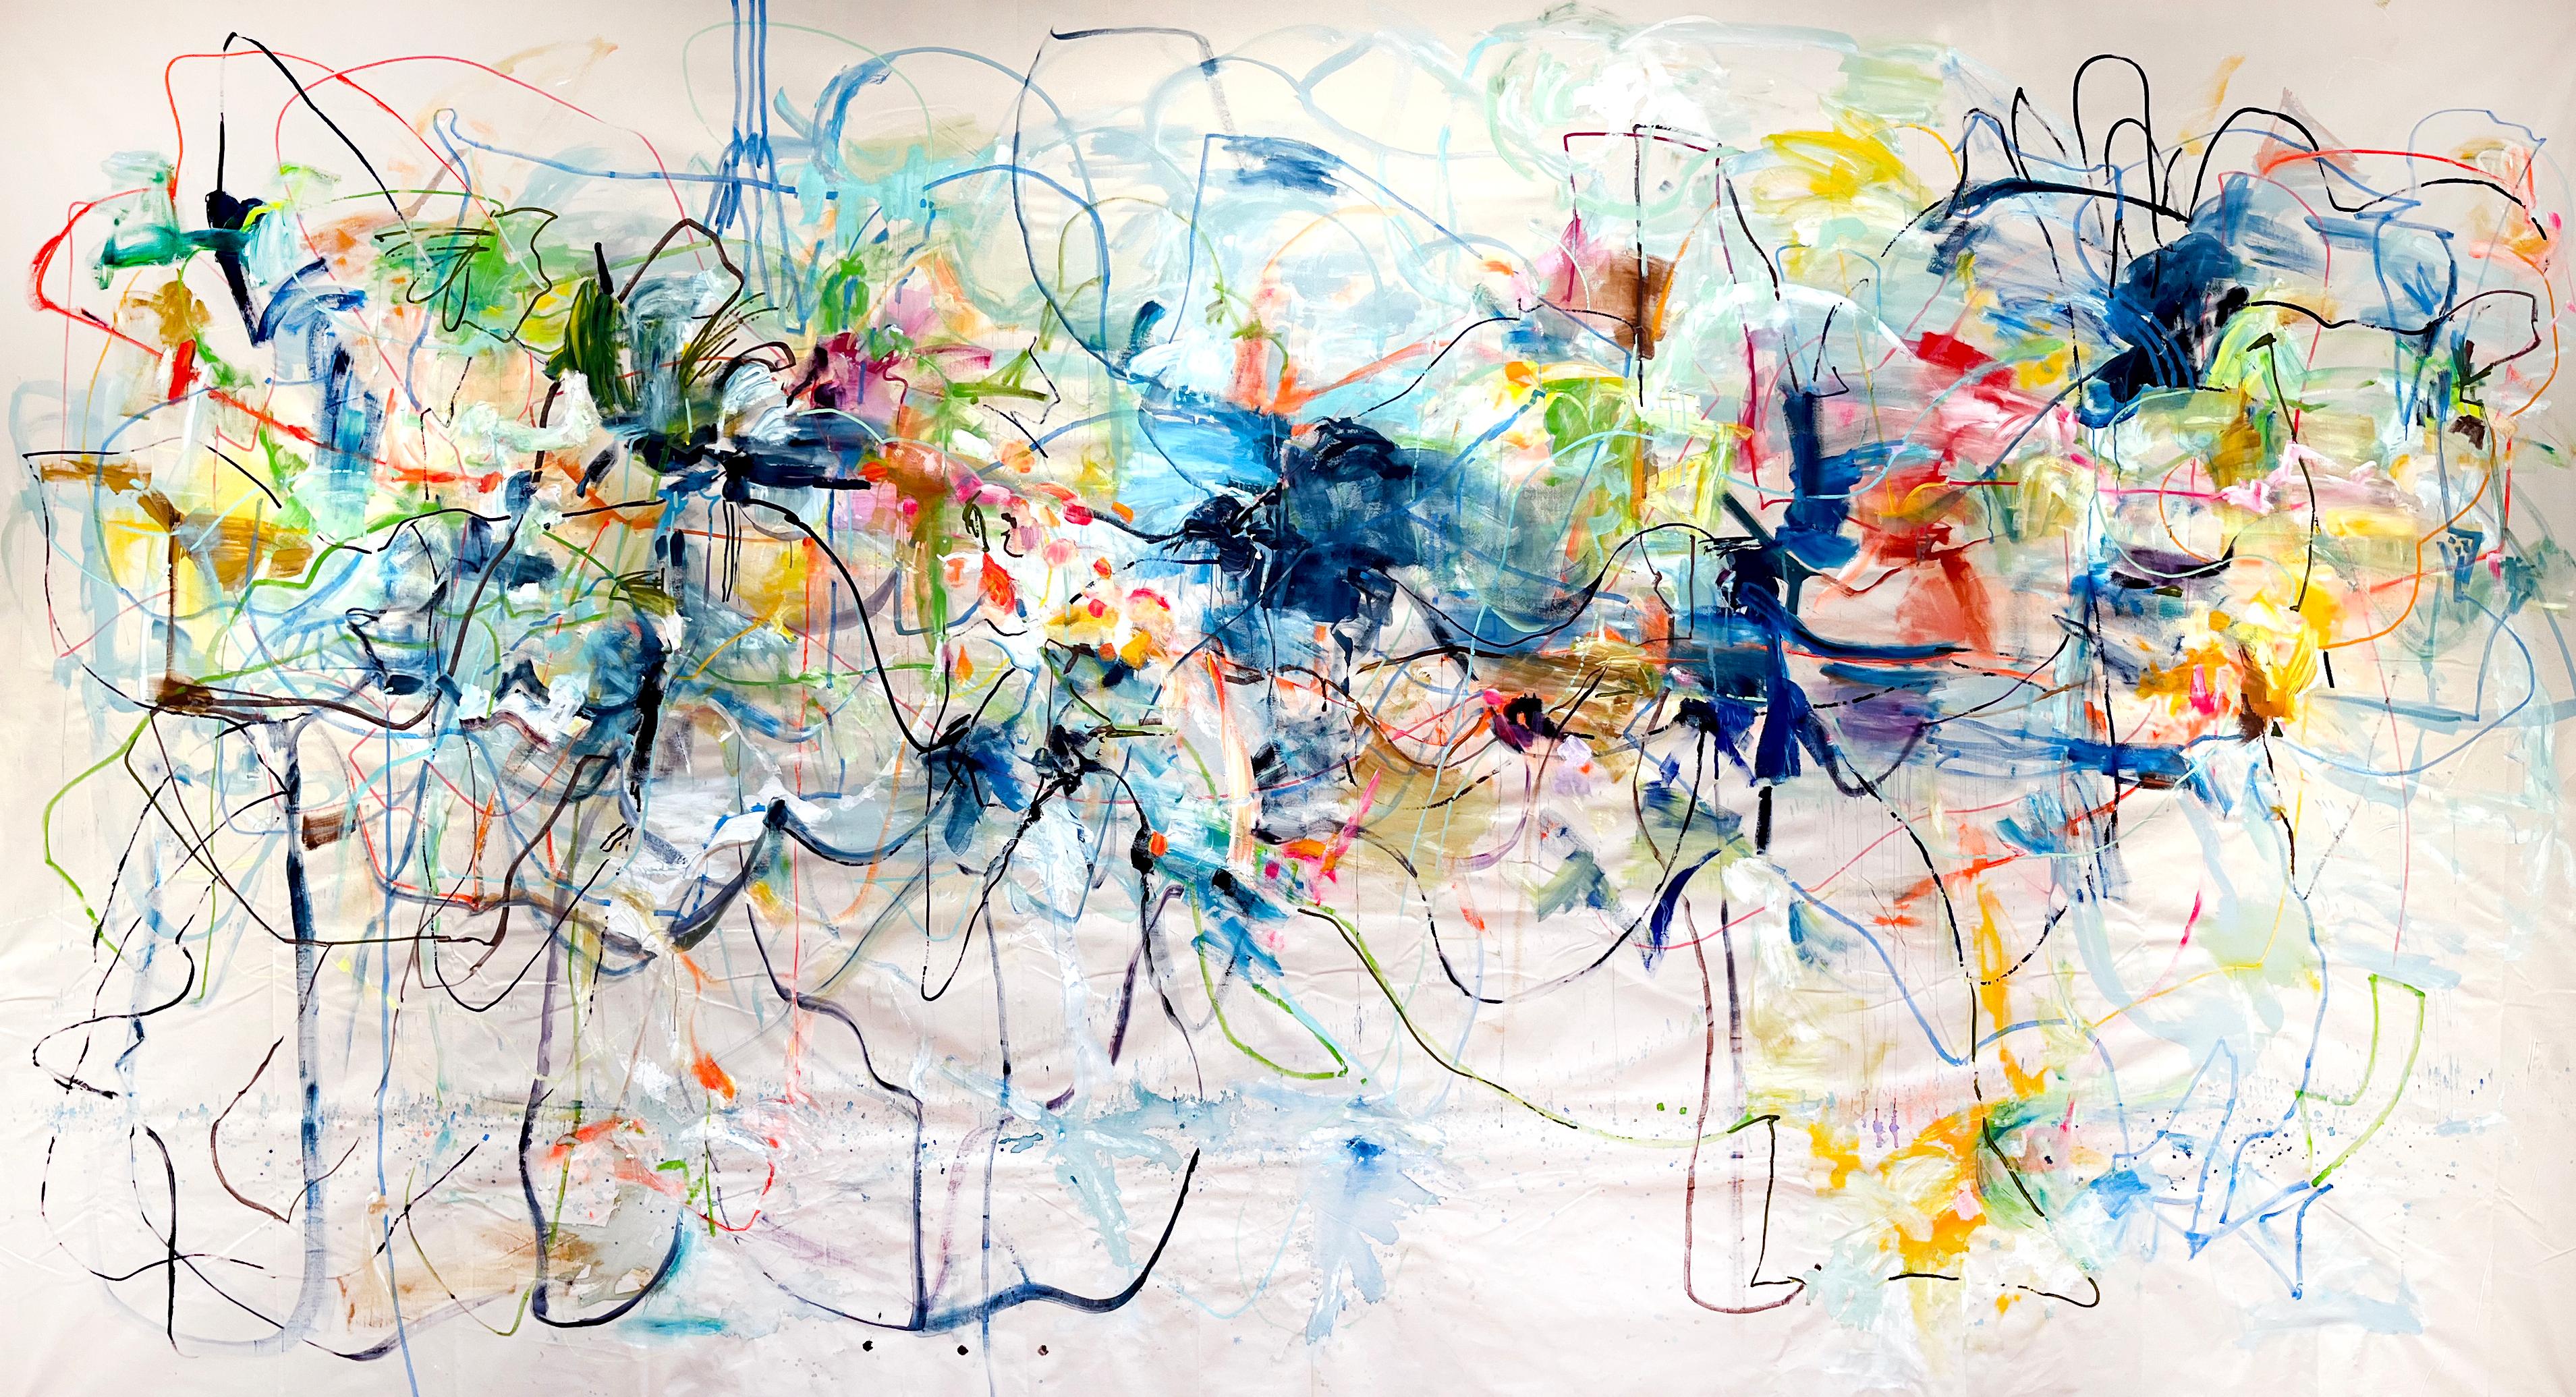 Vicky Barranguet Abstract Painting - 3 AM in LA